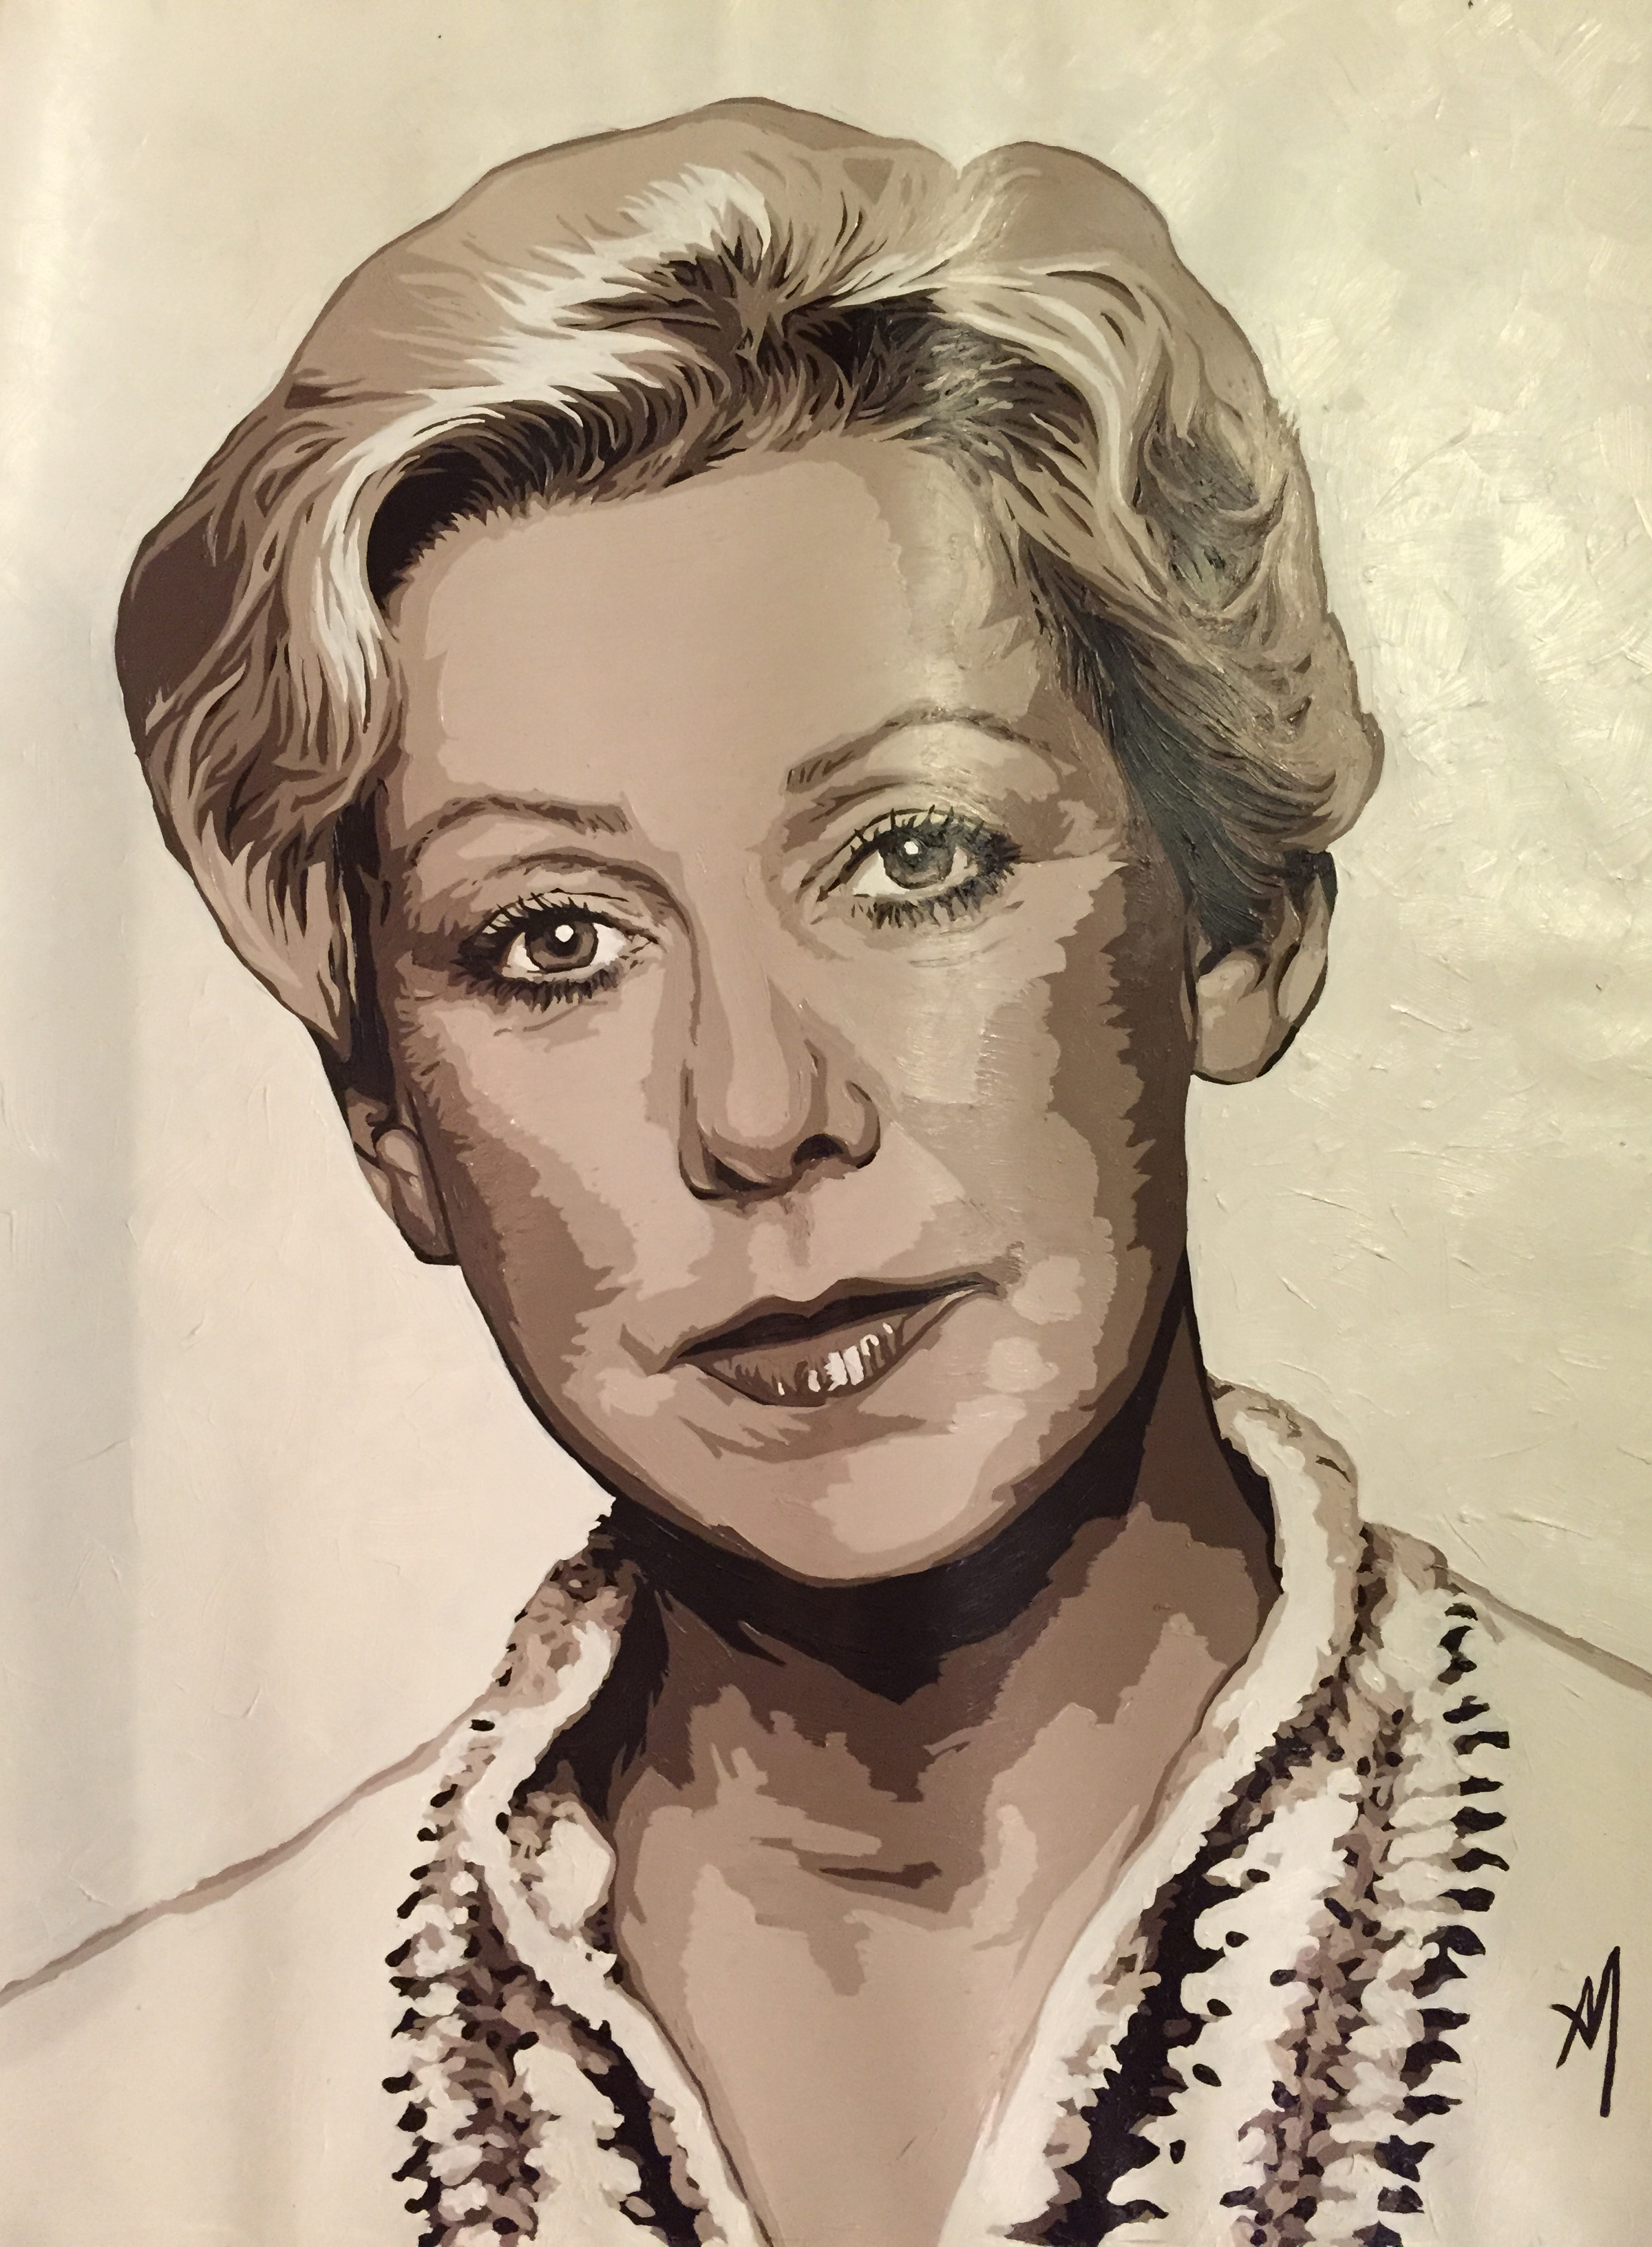 Jane Byrne portrait commissioned by Byrne aide Fran Santoro and given to Ray Hanania as a momento. Copyright 2014 Ray Hanania. All rights reserved. Permission to republish with full credit to Ray Hanania and Illinois News Network www.IllinoisNewsNetwork.com